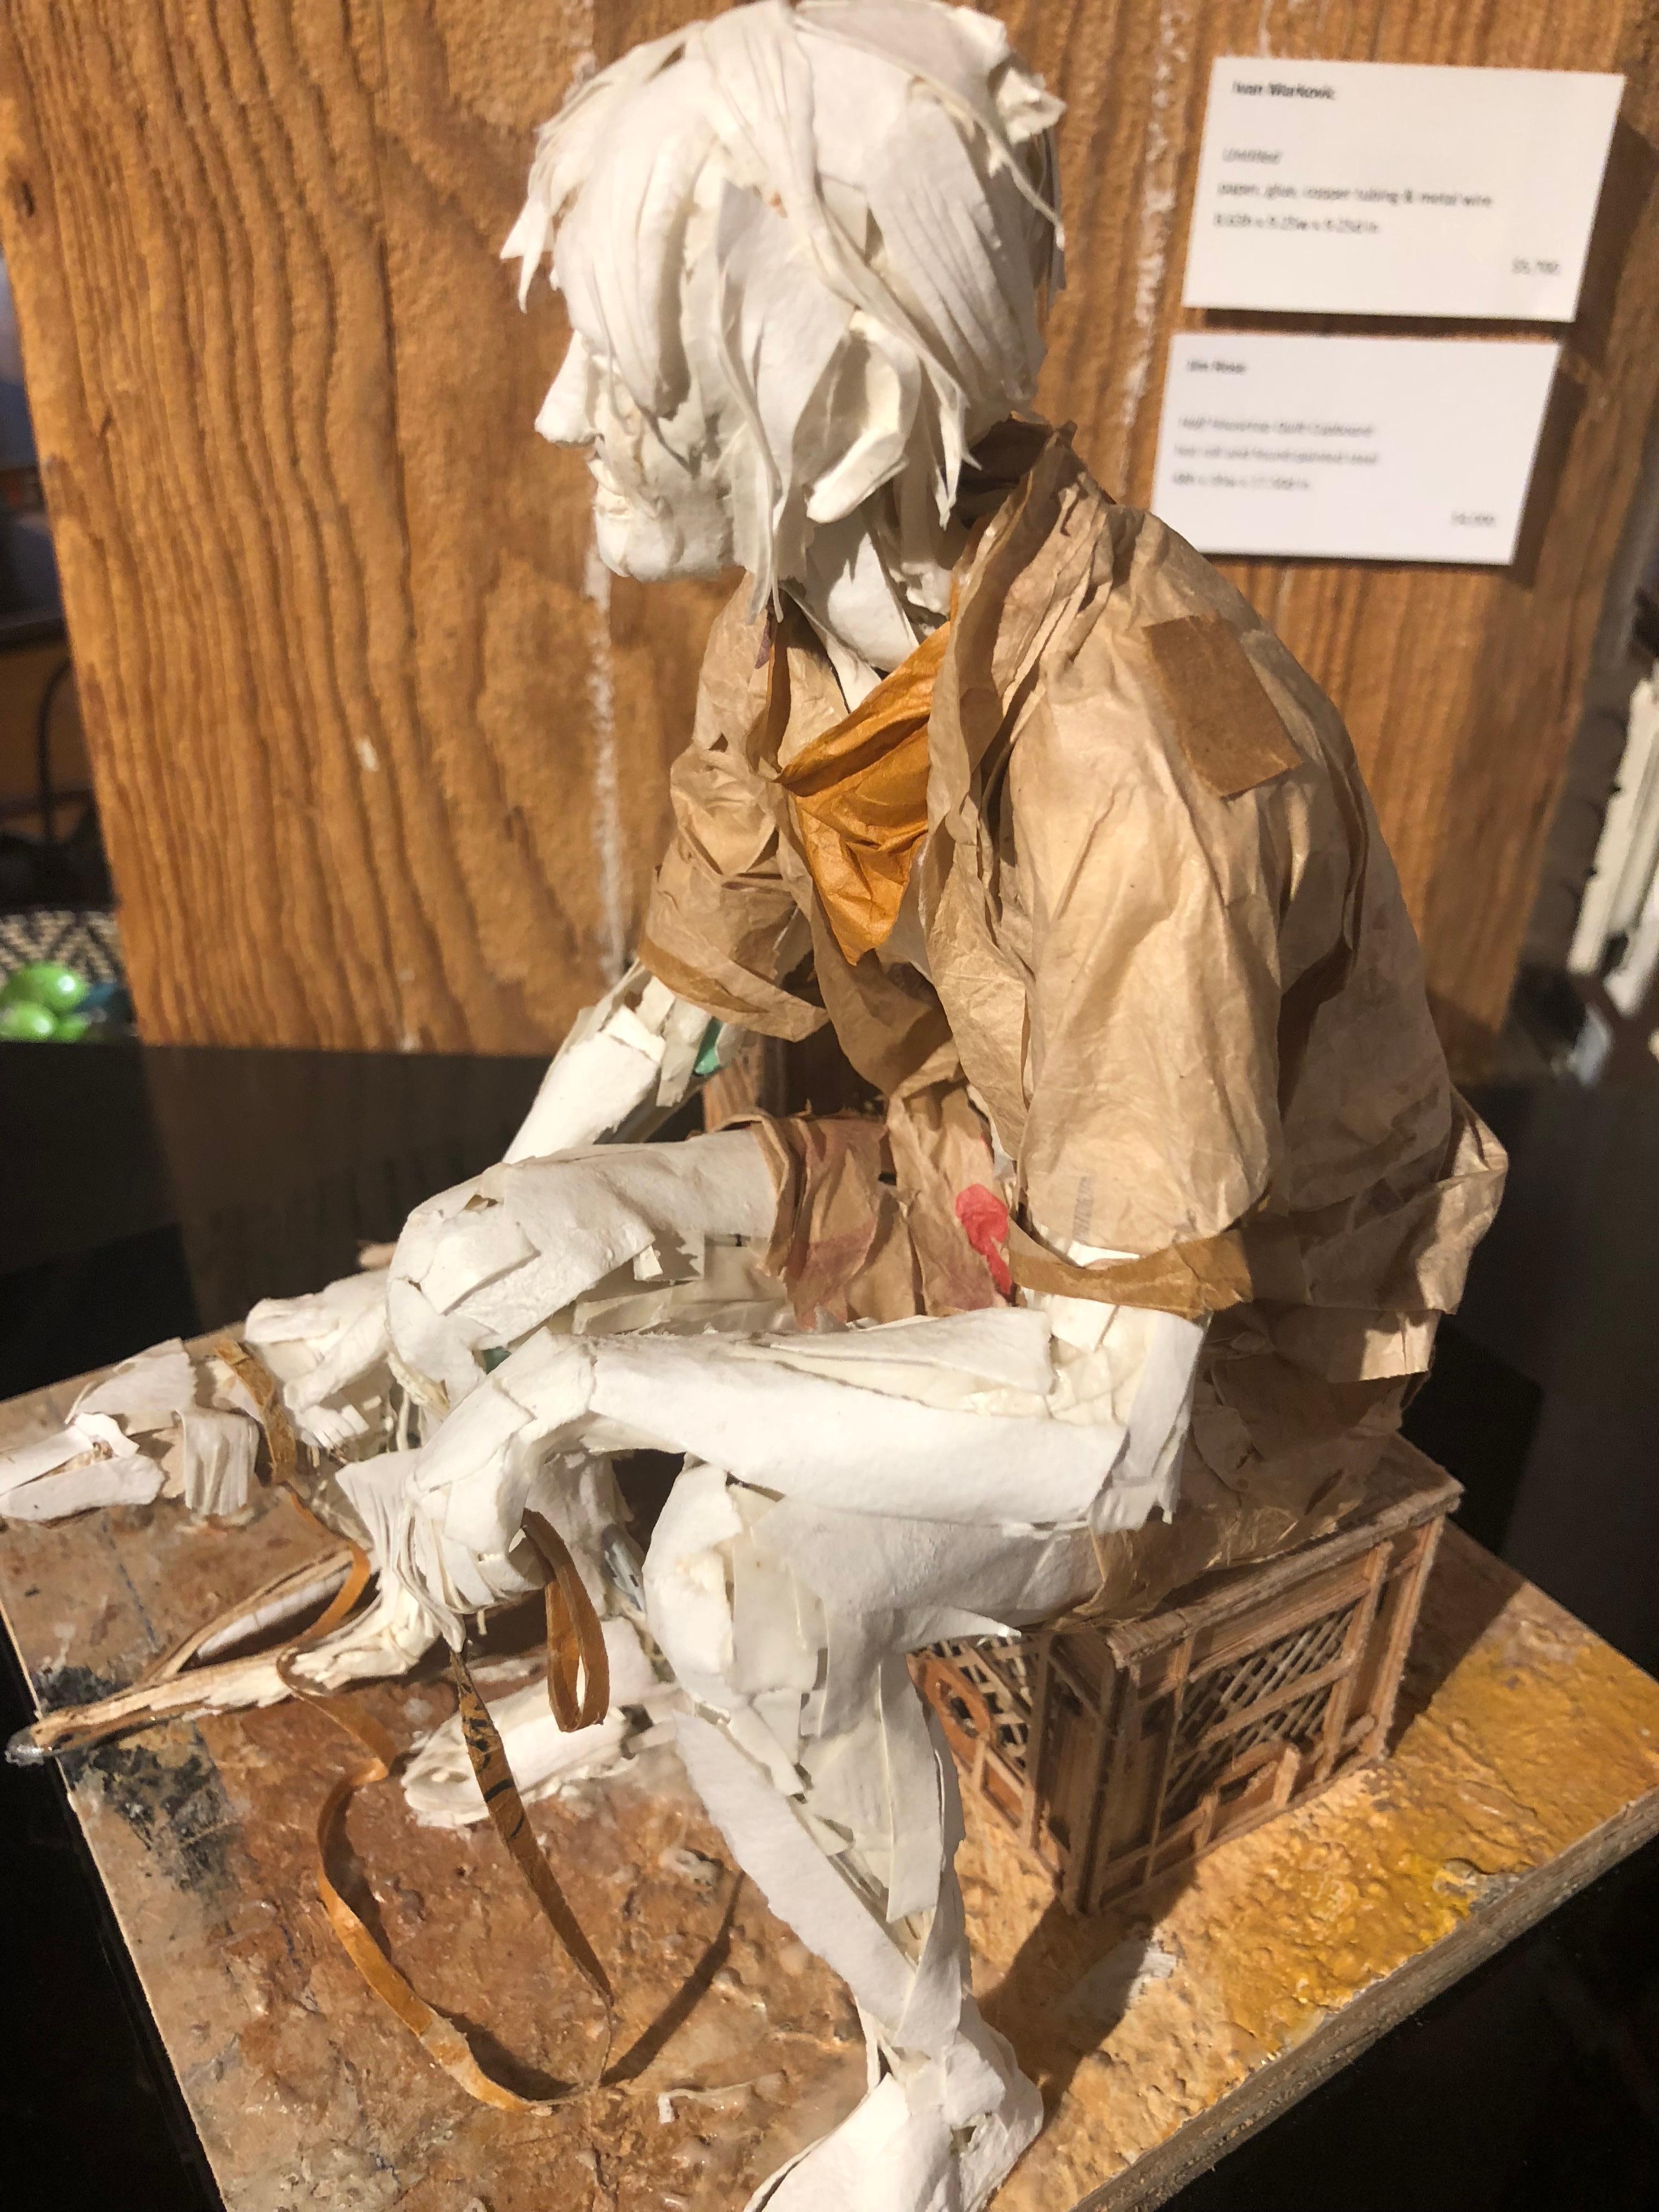 Man with Dog - Highly Detailed Sculpture Made of Paper, Glue, Wire, and Wood 2